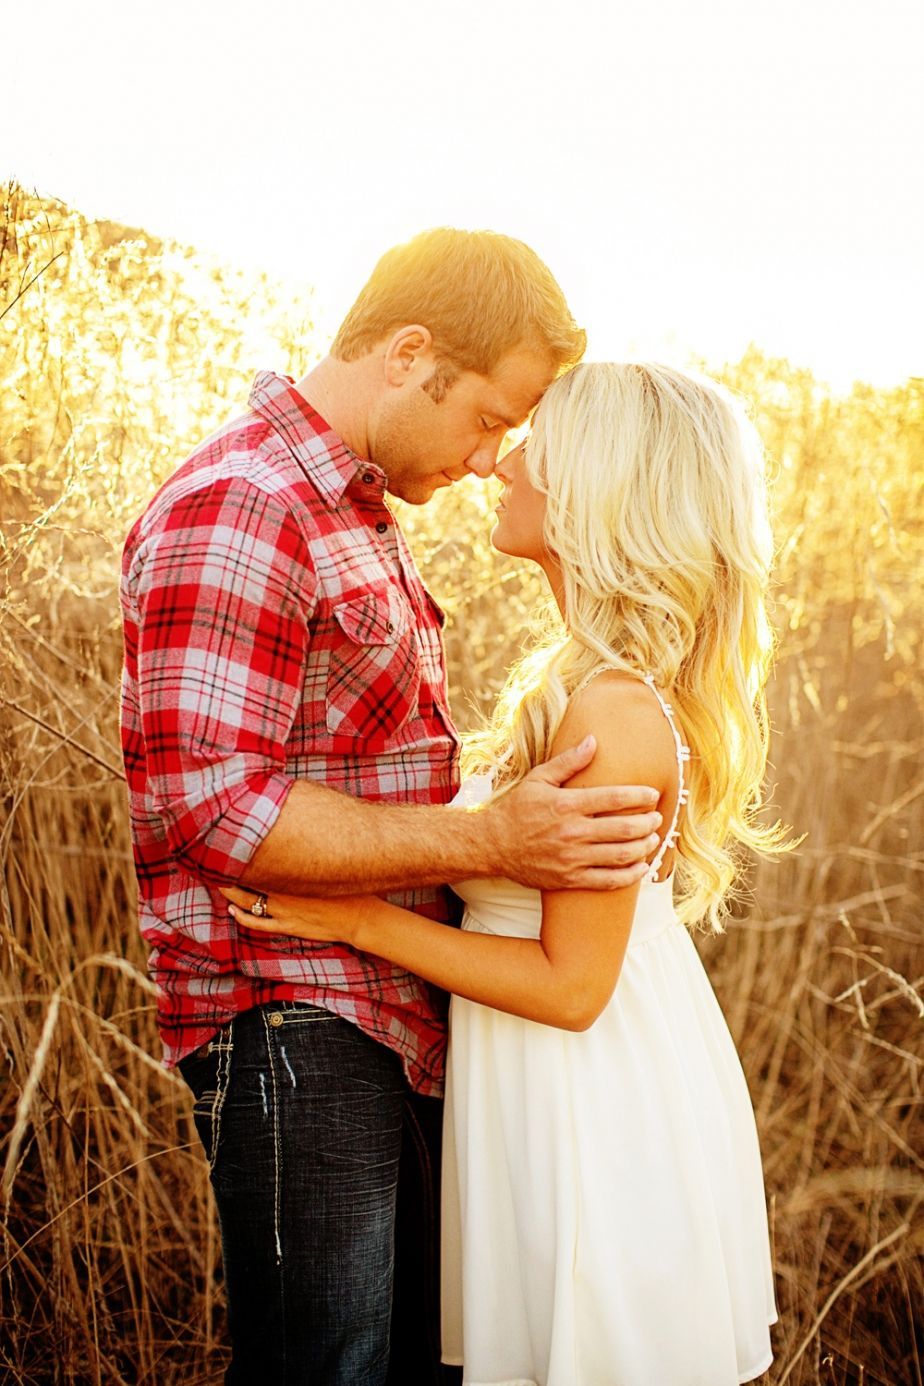 Gorgeous light! Love the country feel to these pics! #engagement #wedding